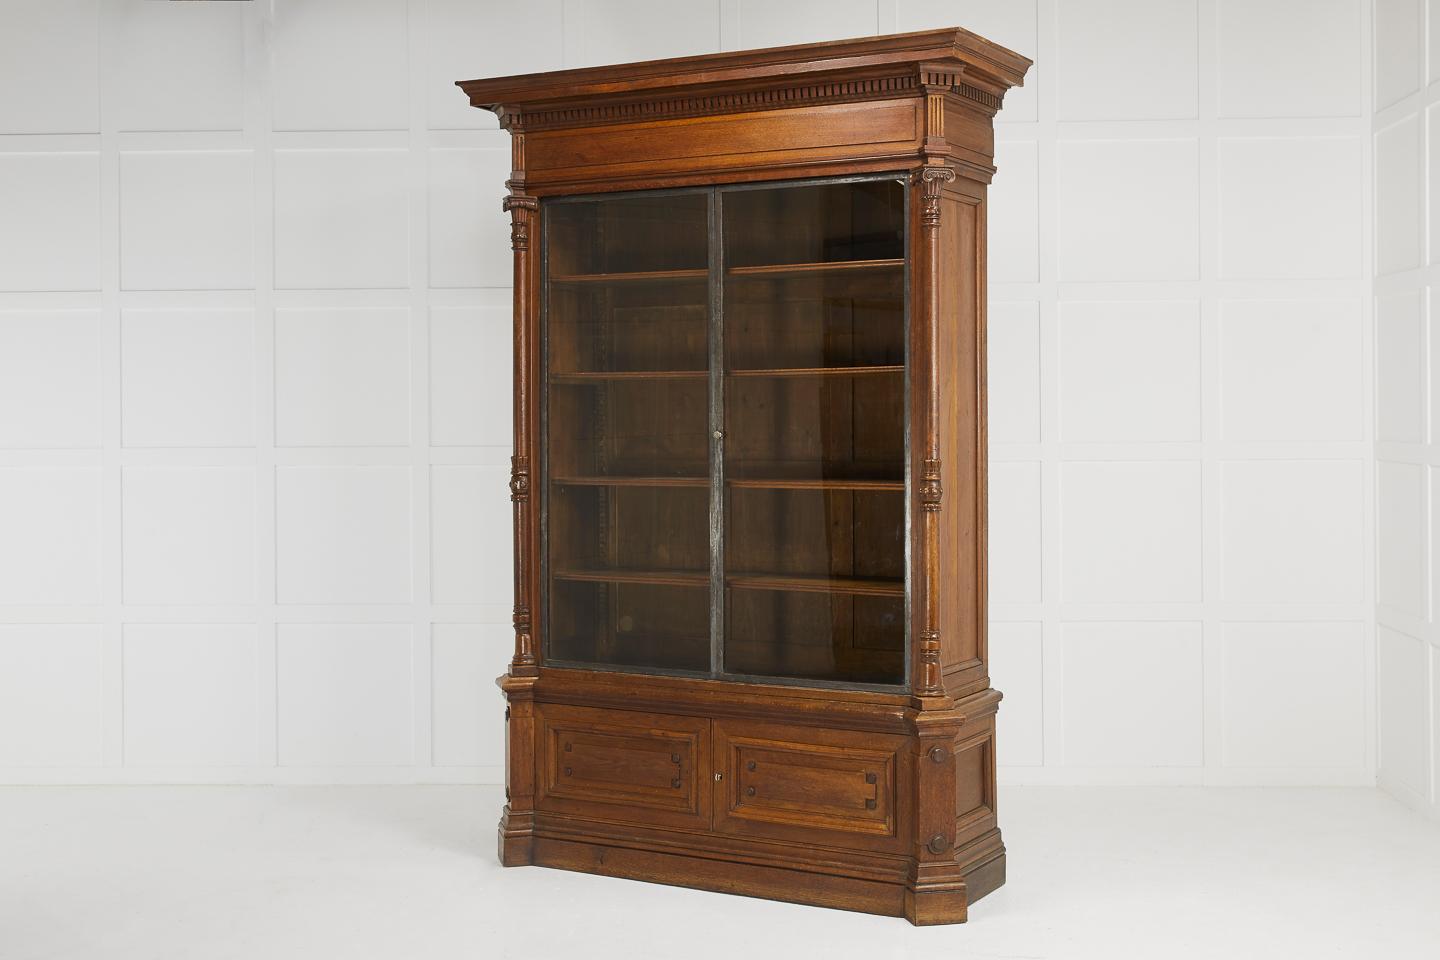 Important, large, 19th century French oak library bookcase, beautifully proportioned with glazed metal frame doors and great patina.